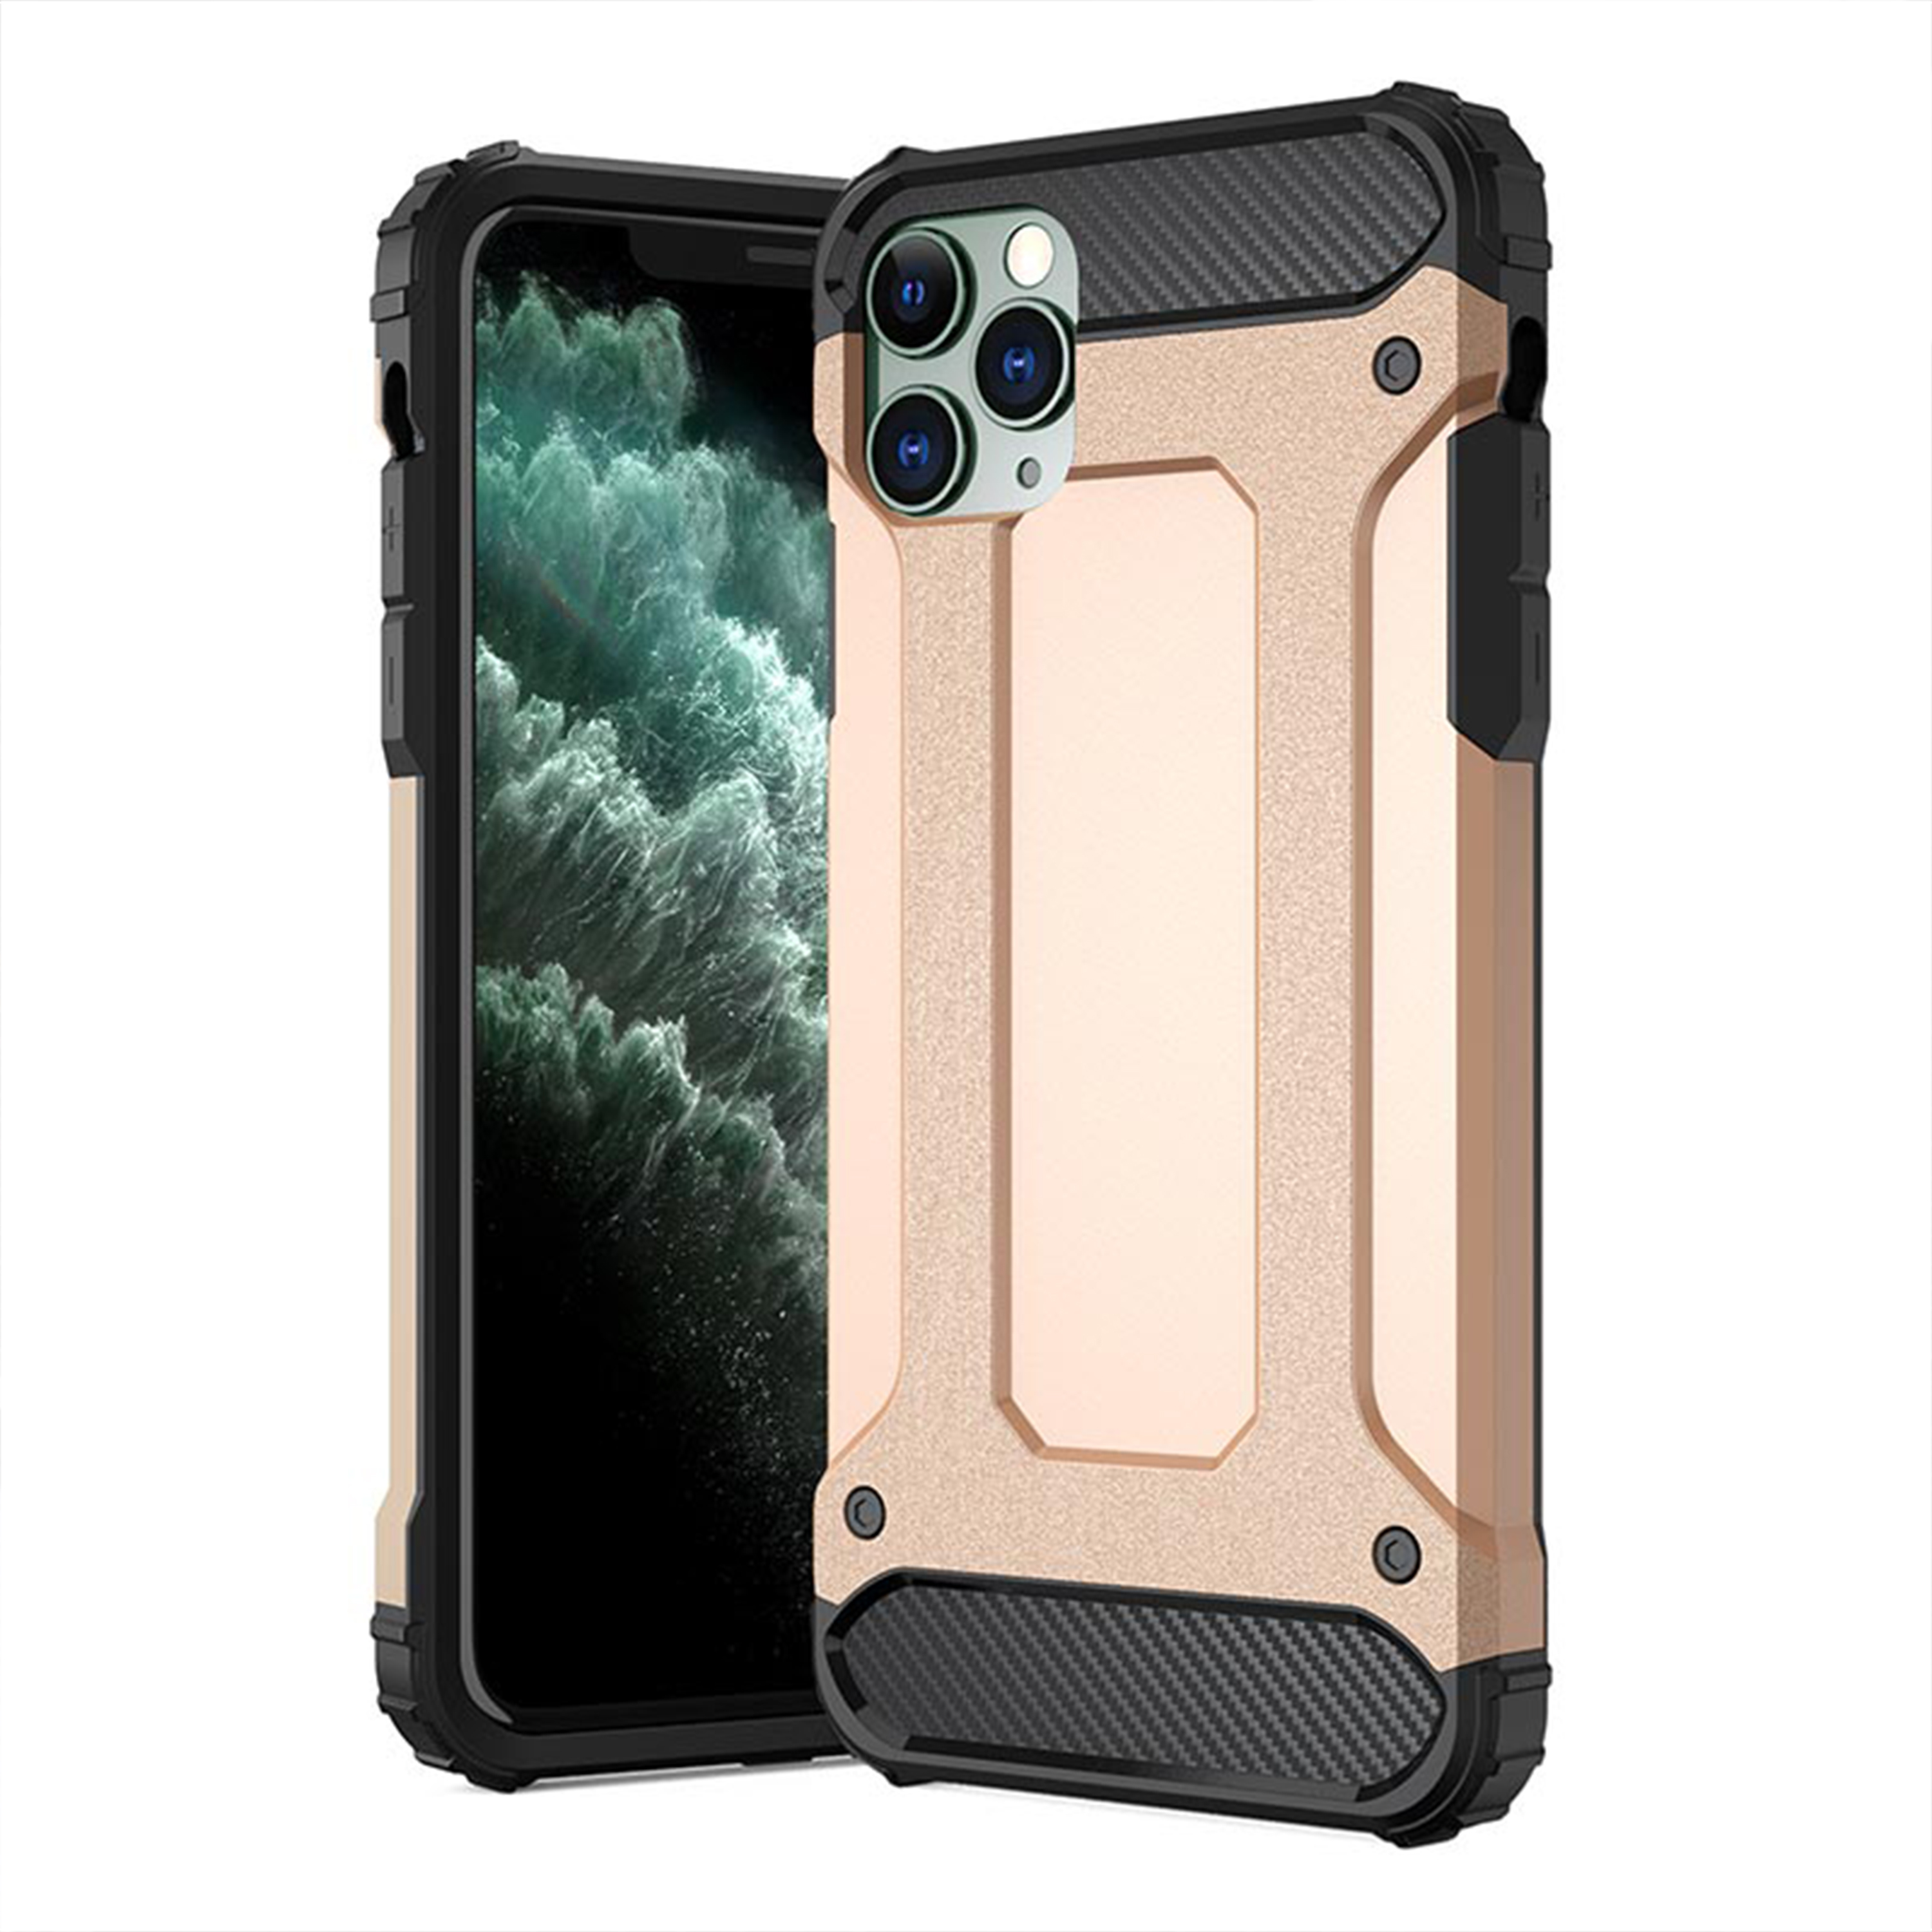 HBASICS Armor Handyhülle für IPhone XS MAX, Rose iPhone, XS Gold MAX, Backcover